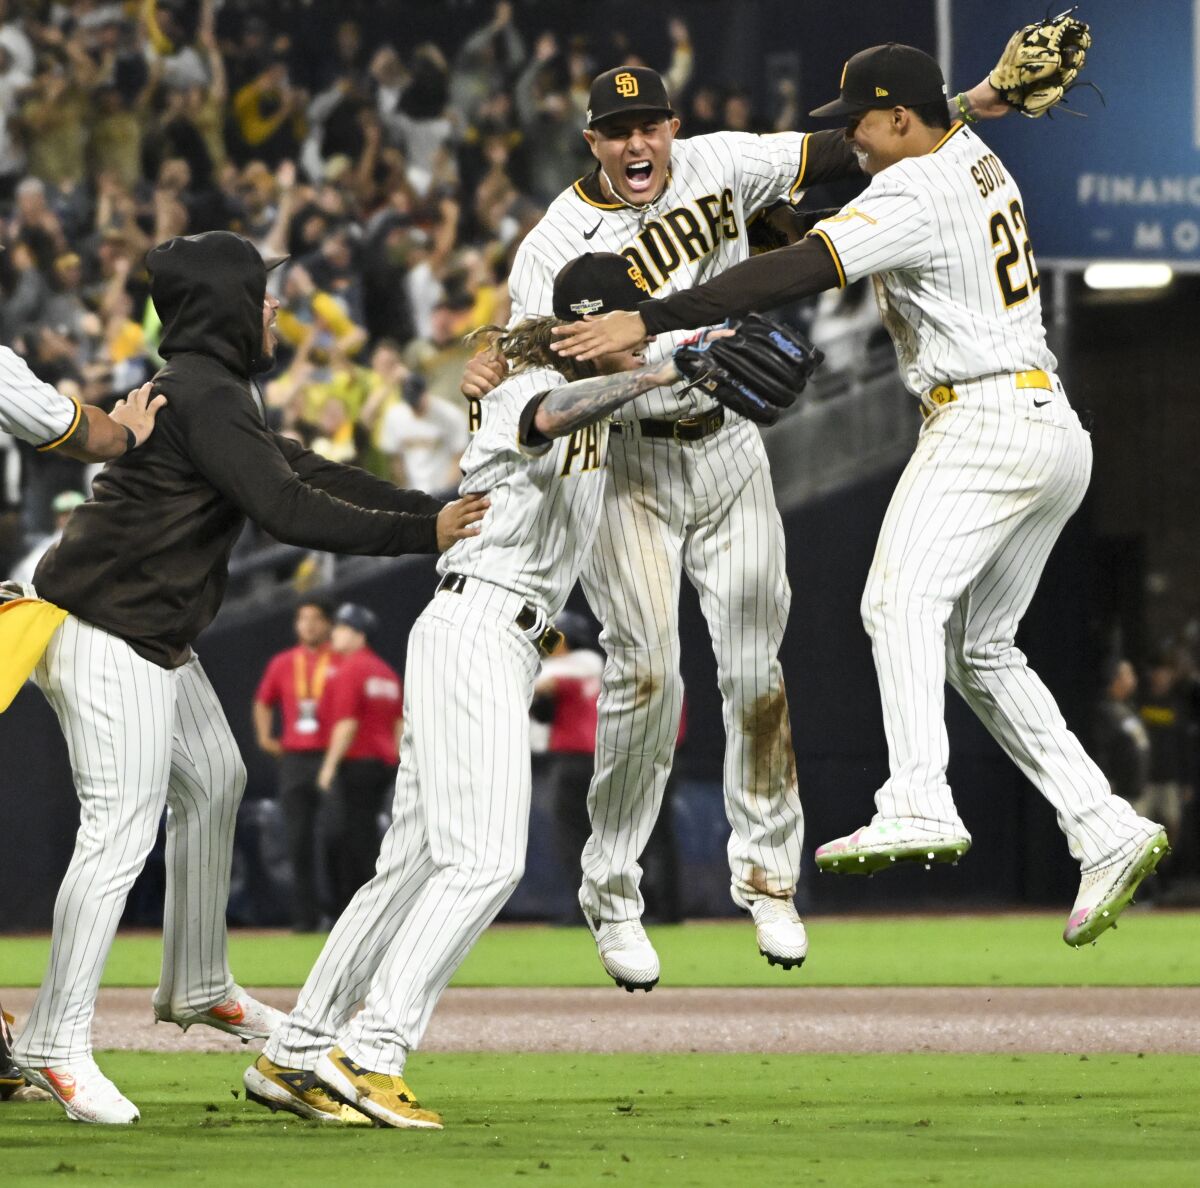 The San Diego Padres players celebrate after defeating the Dodgers in Game 4 of the NLDS.